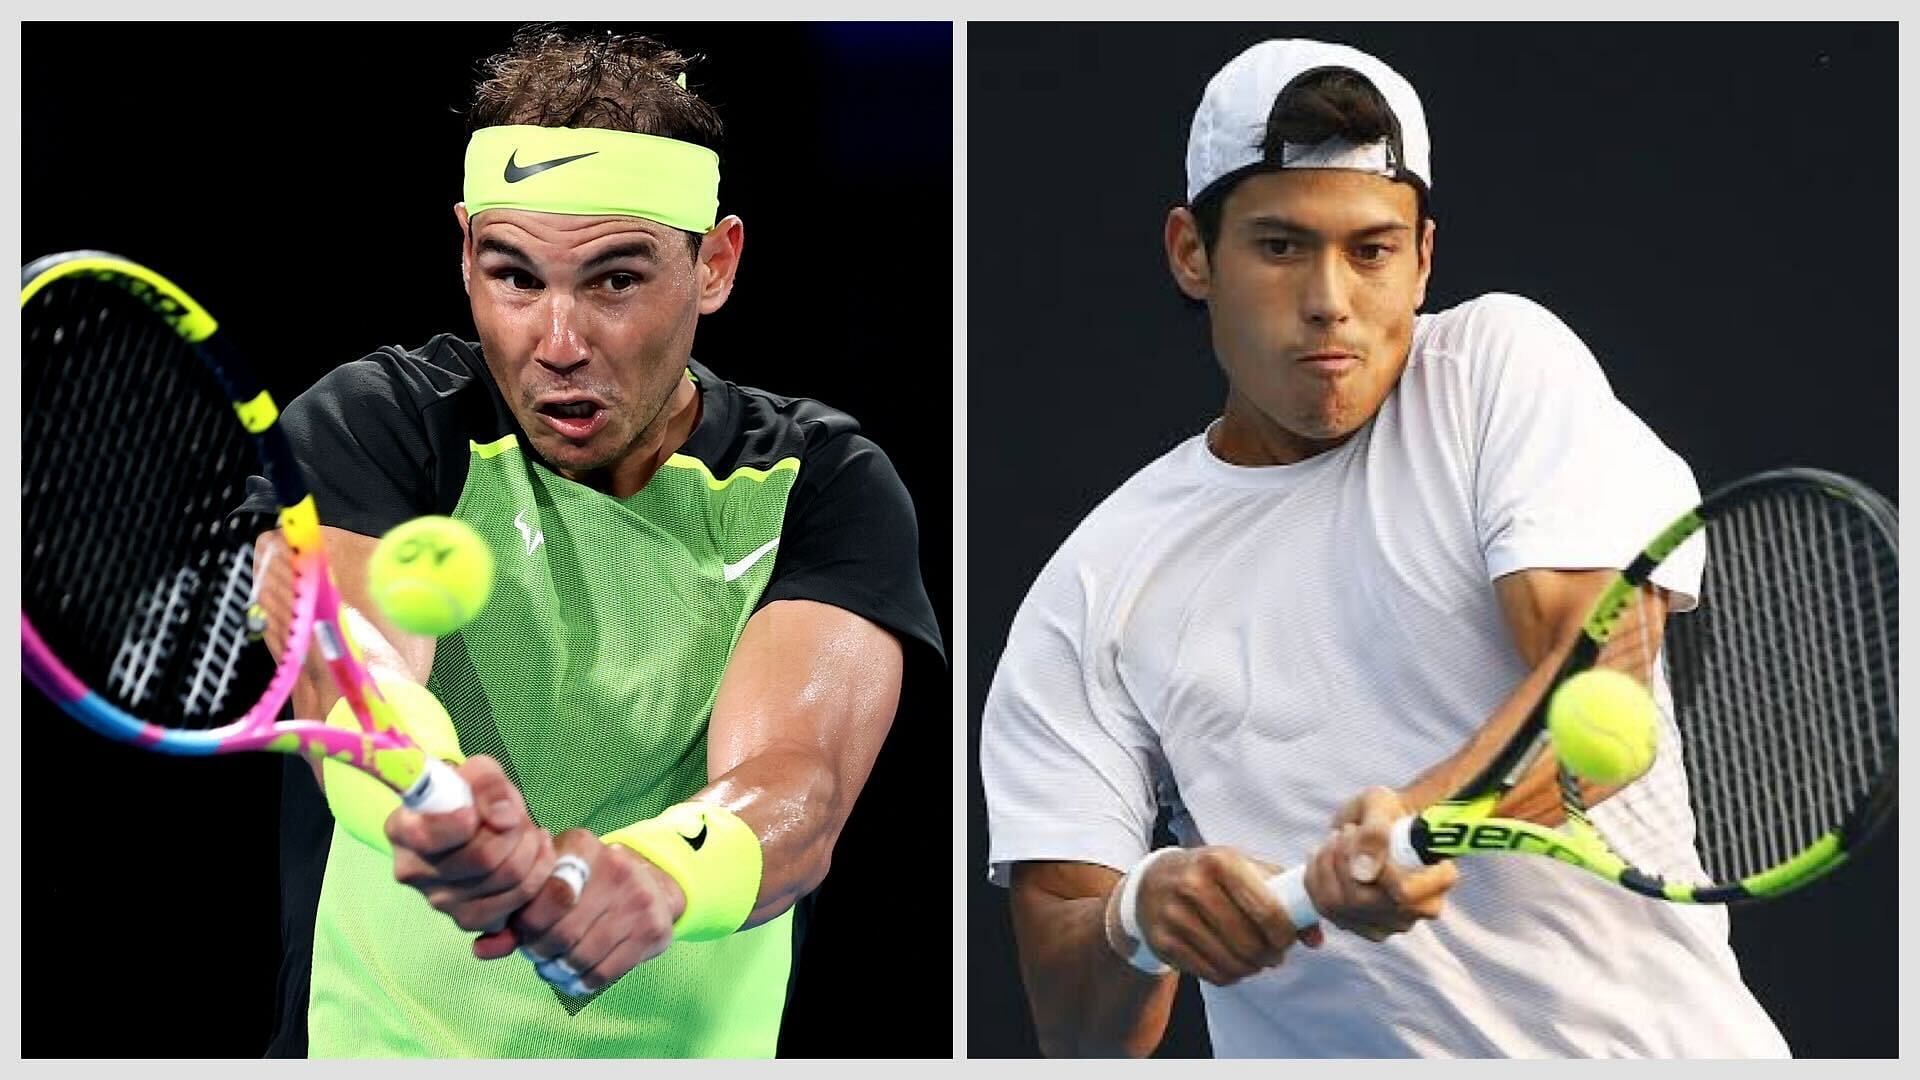 Nadal will face Kubler in the second round of the Brisbane International 